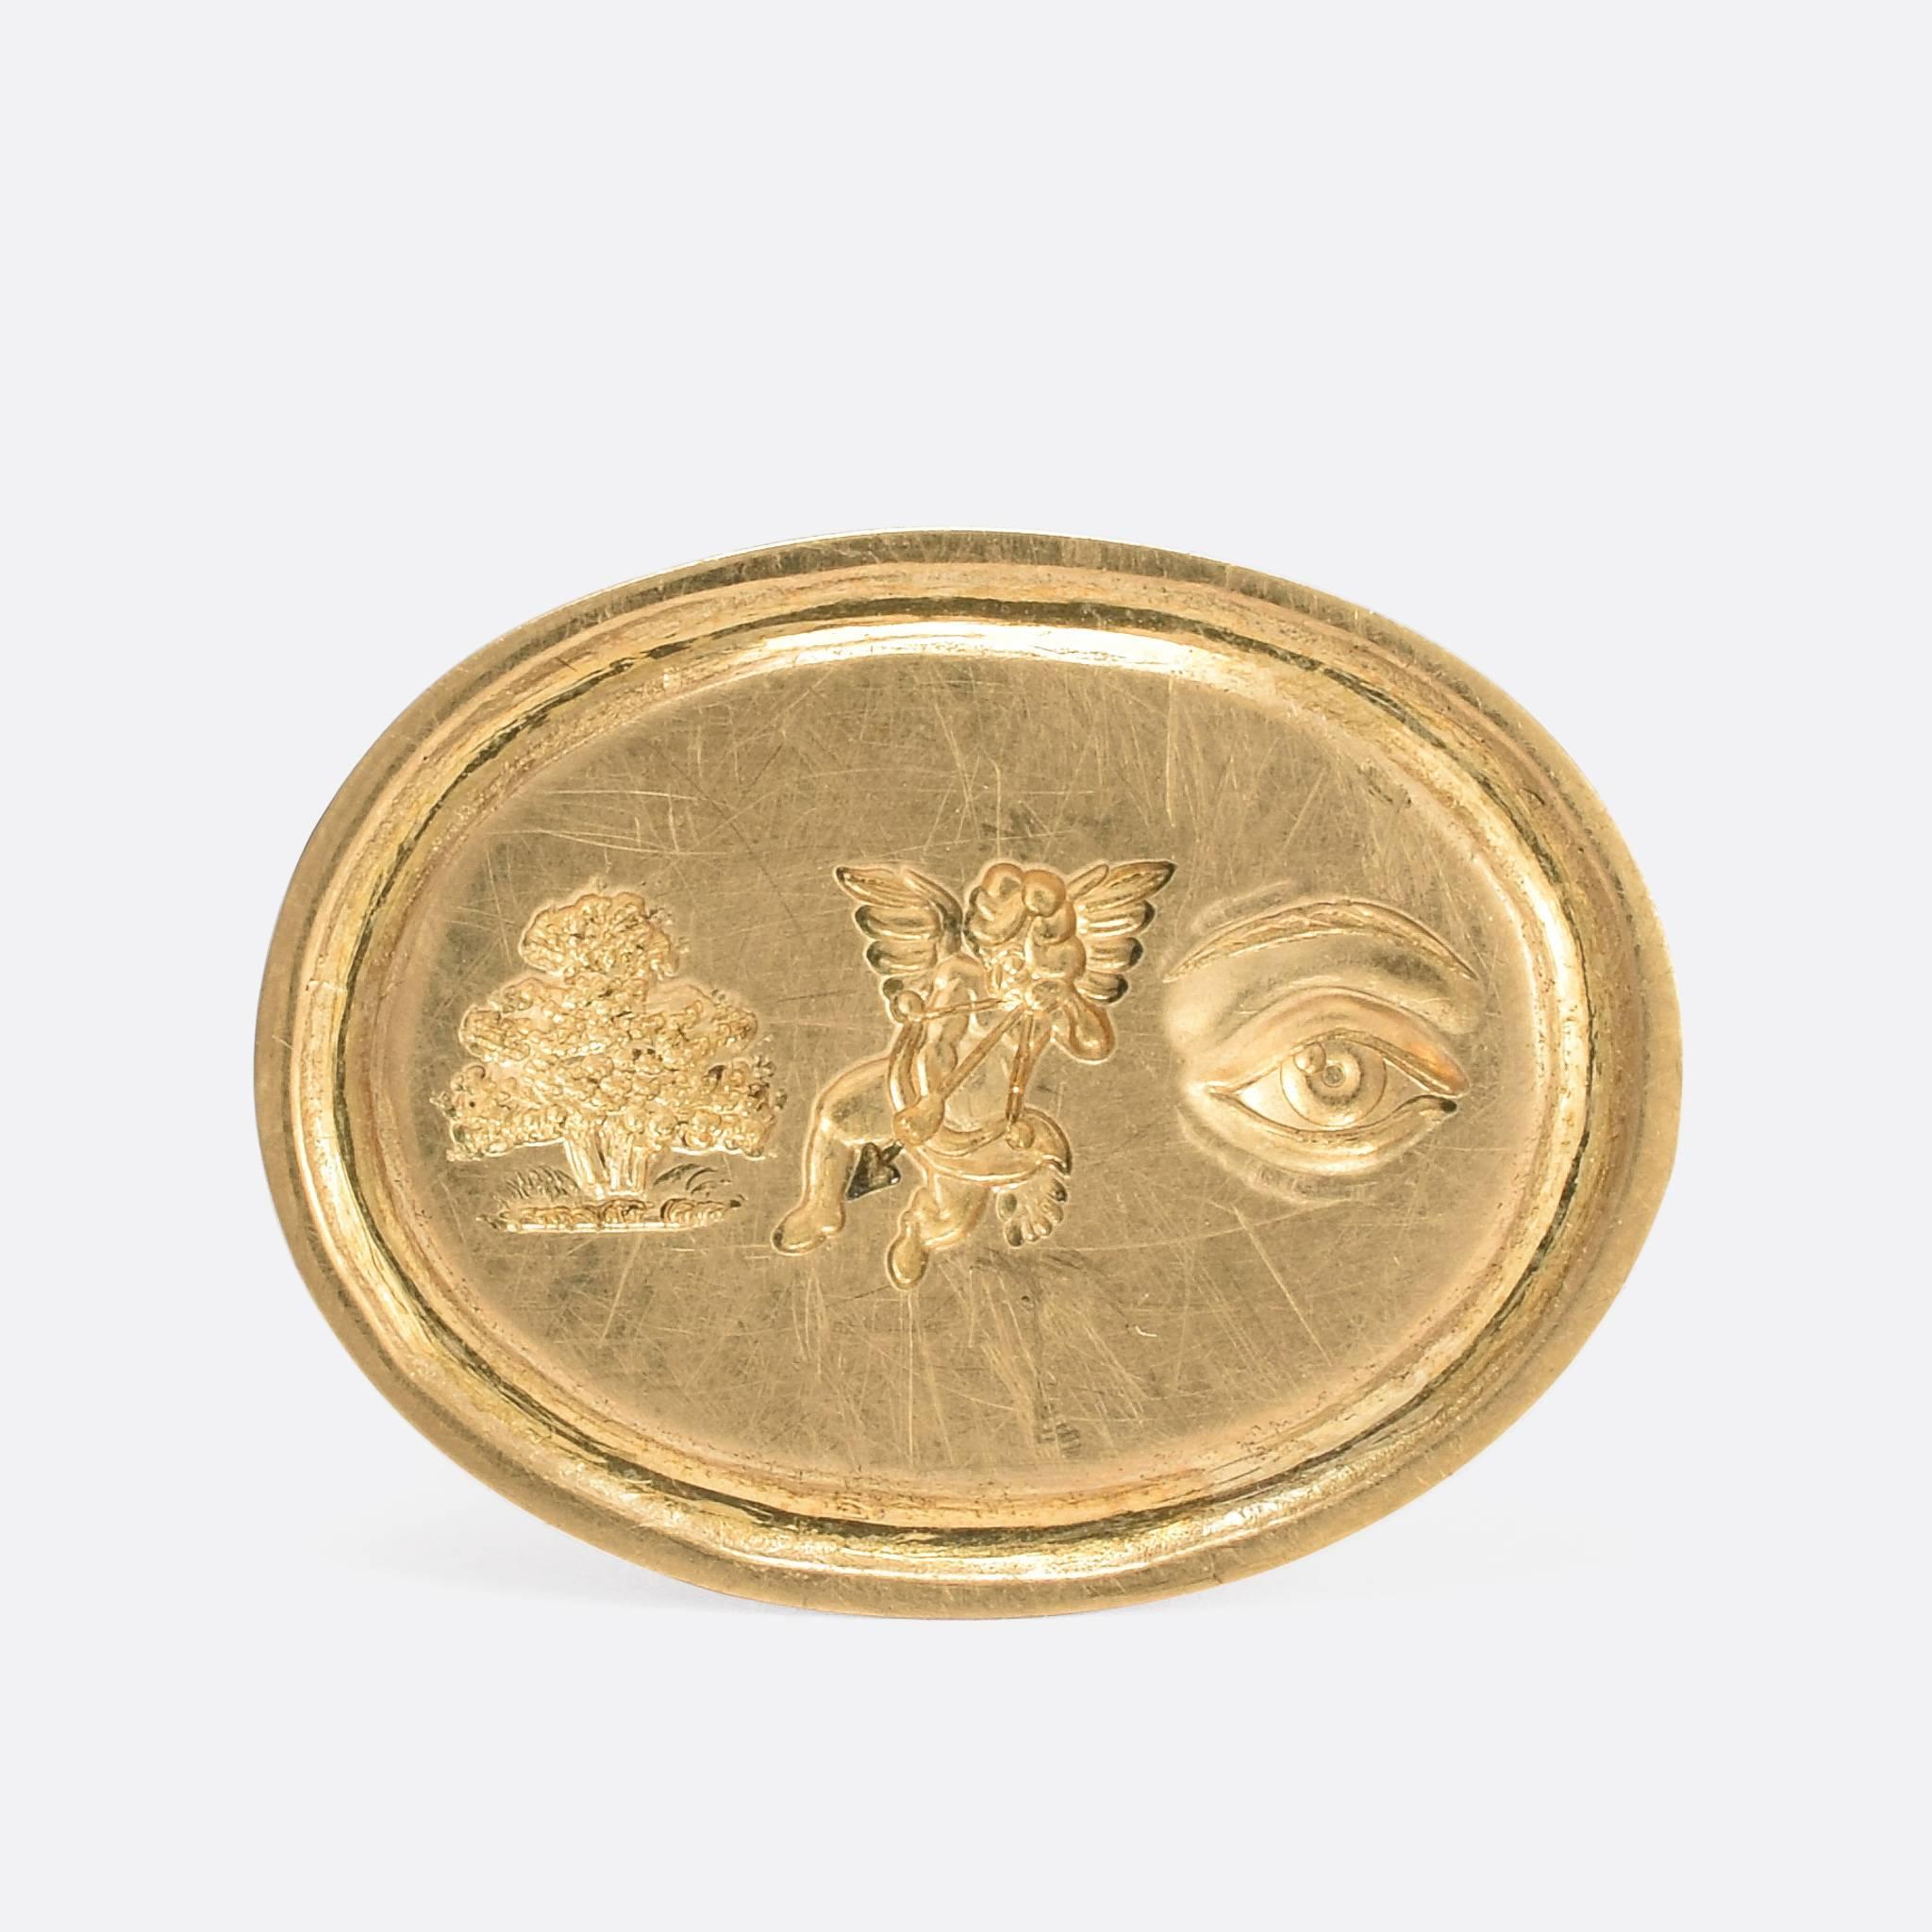 This gold signet ring features a hand carved intaglio rebus puzzle. Popular in the Georgian era, the rebus puzzle typically uses pictures, symbols or letters to phonetically 